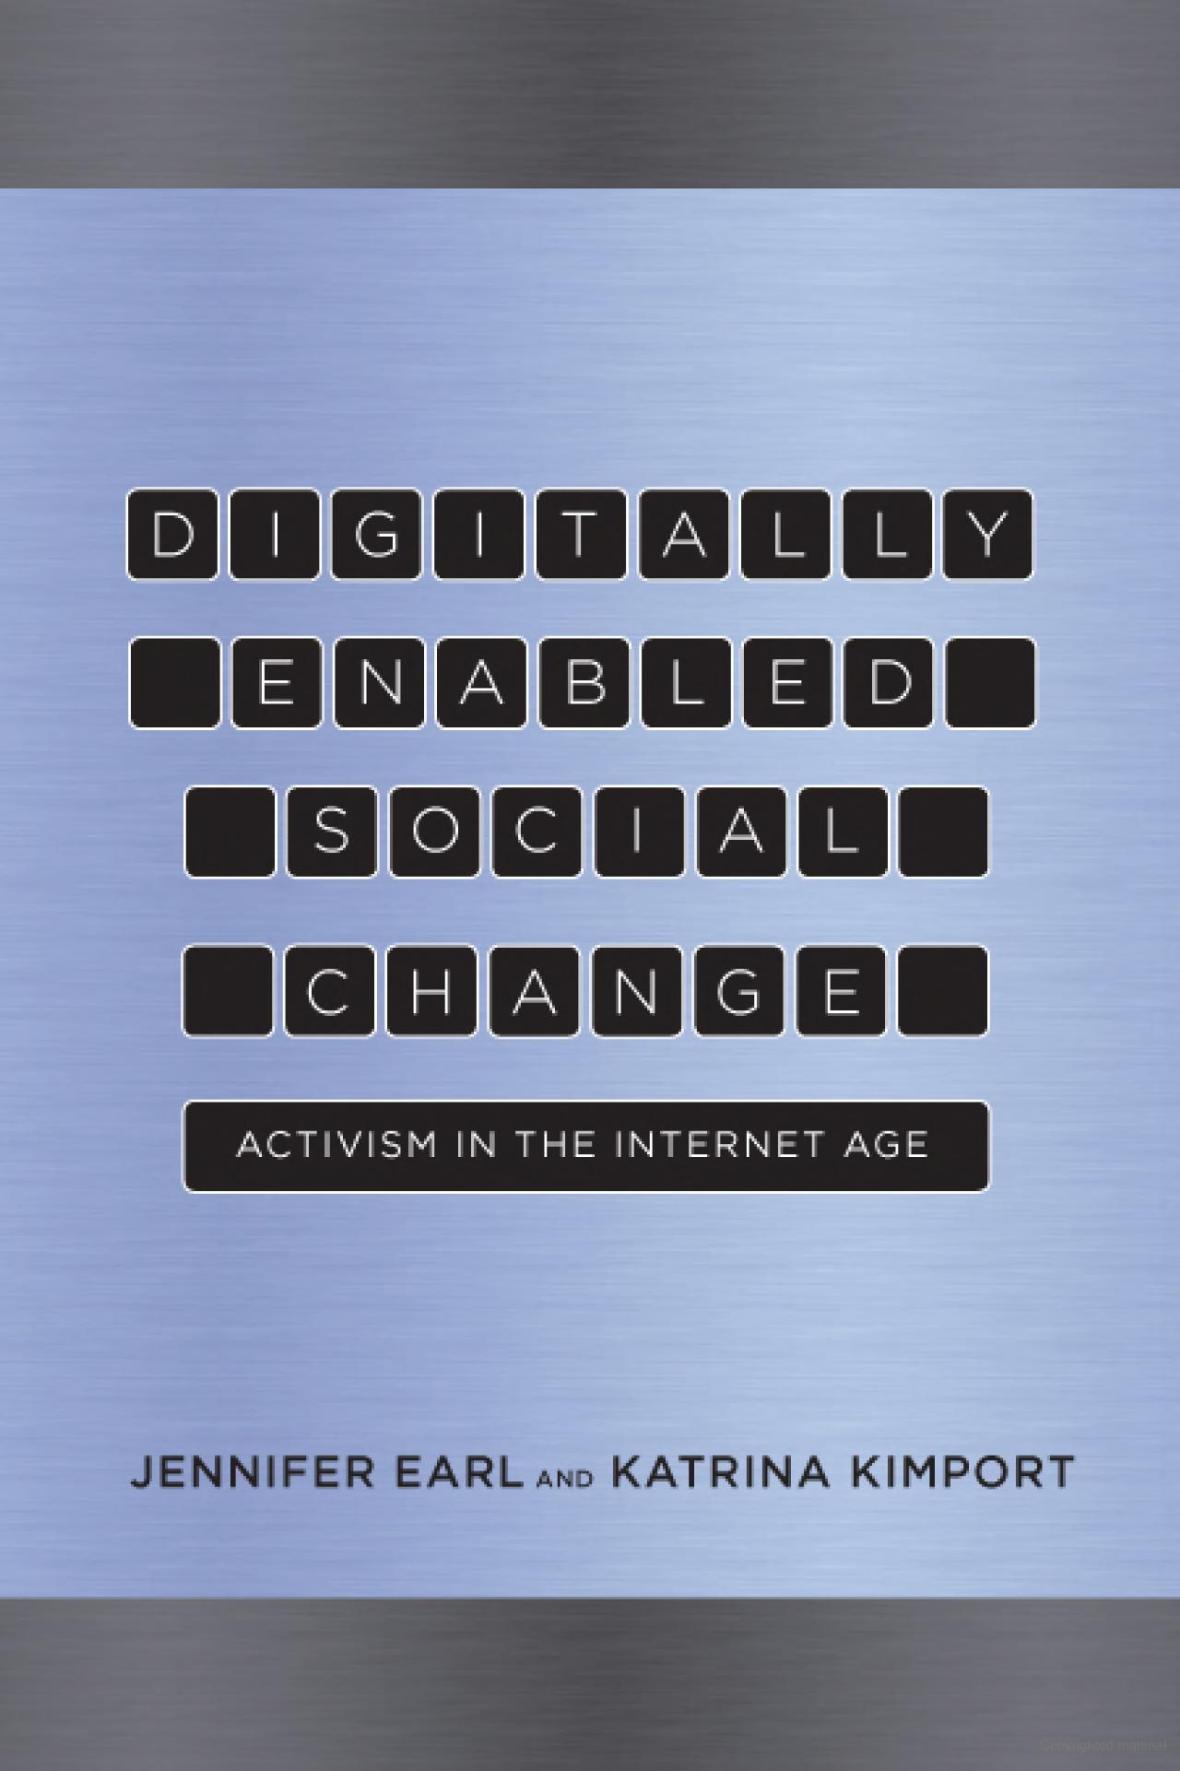 A cover image of Digital Activism by Katrina Kimport